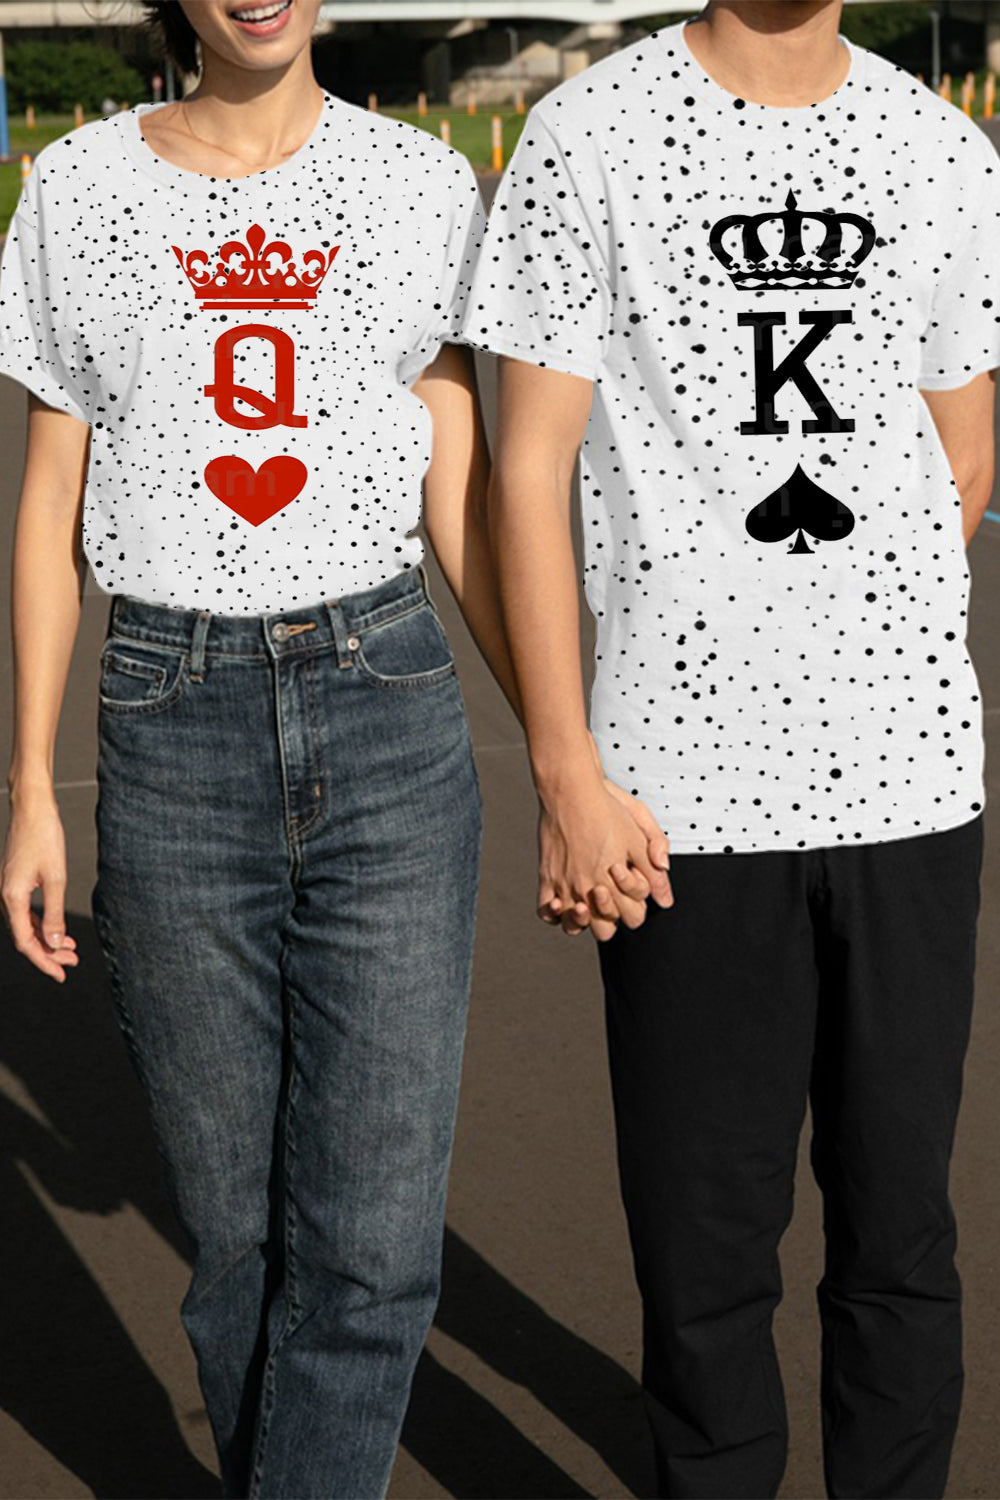 King & Queen Print Couple Outfit T-Shirt